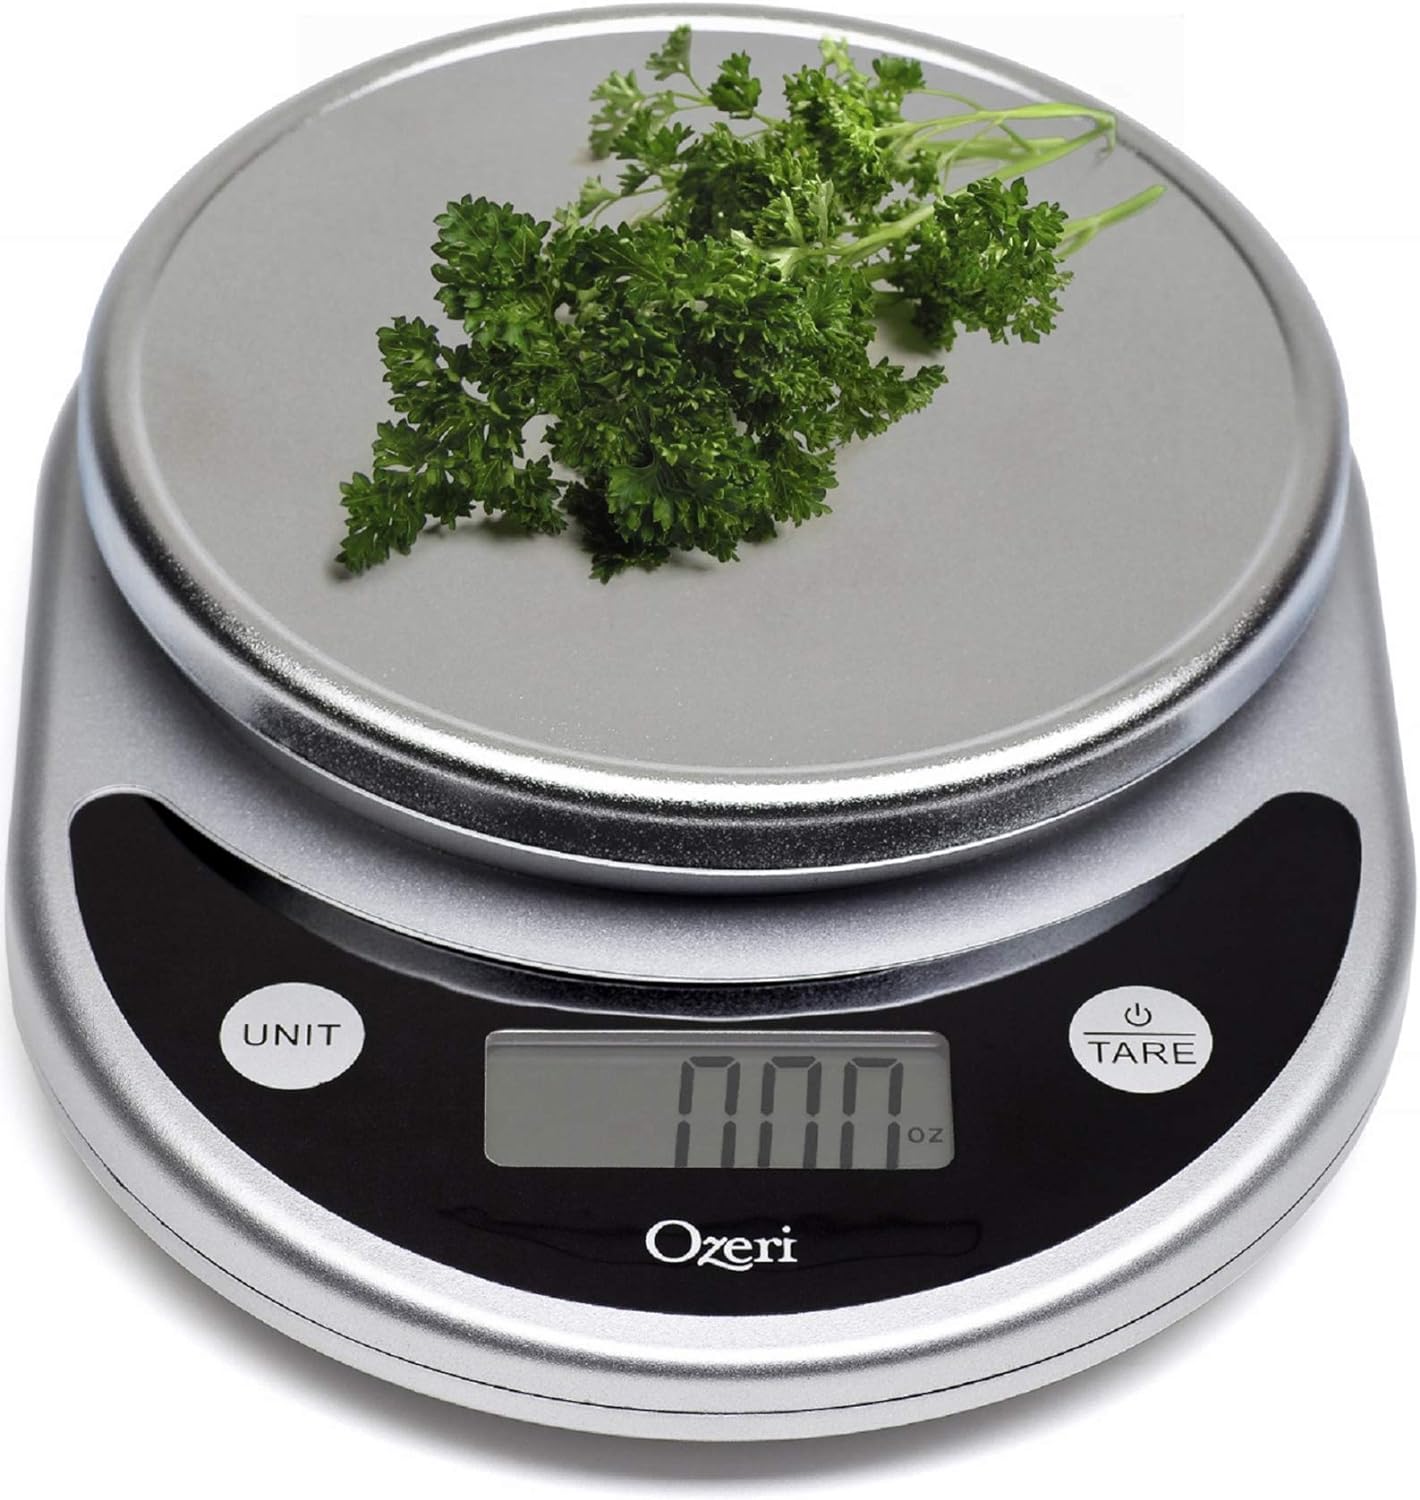 Digital Multifunction Kitchen and Food Scale